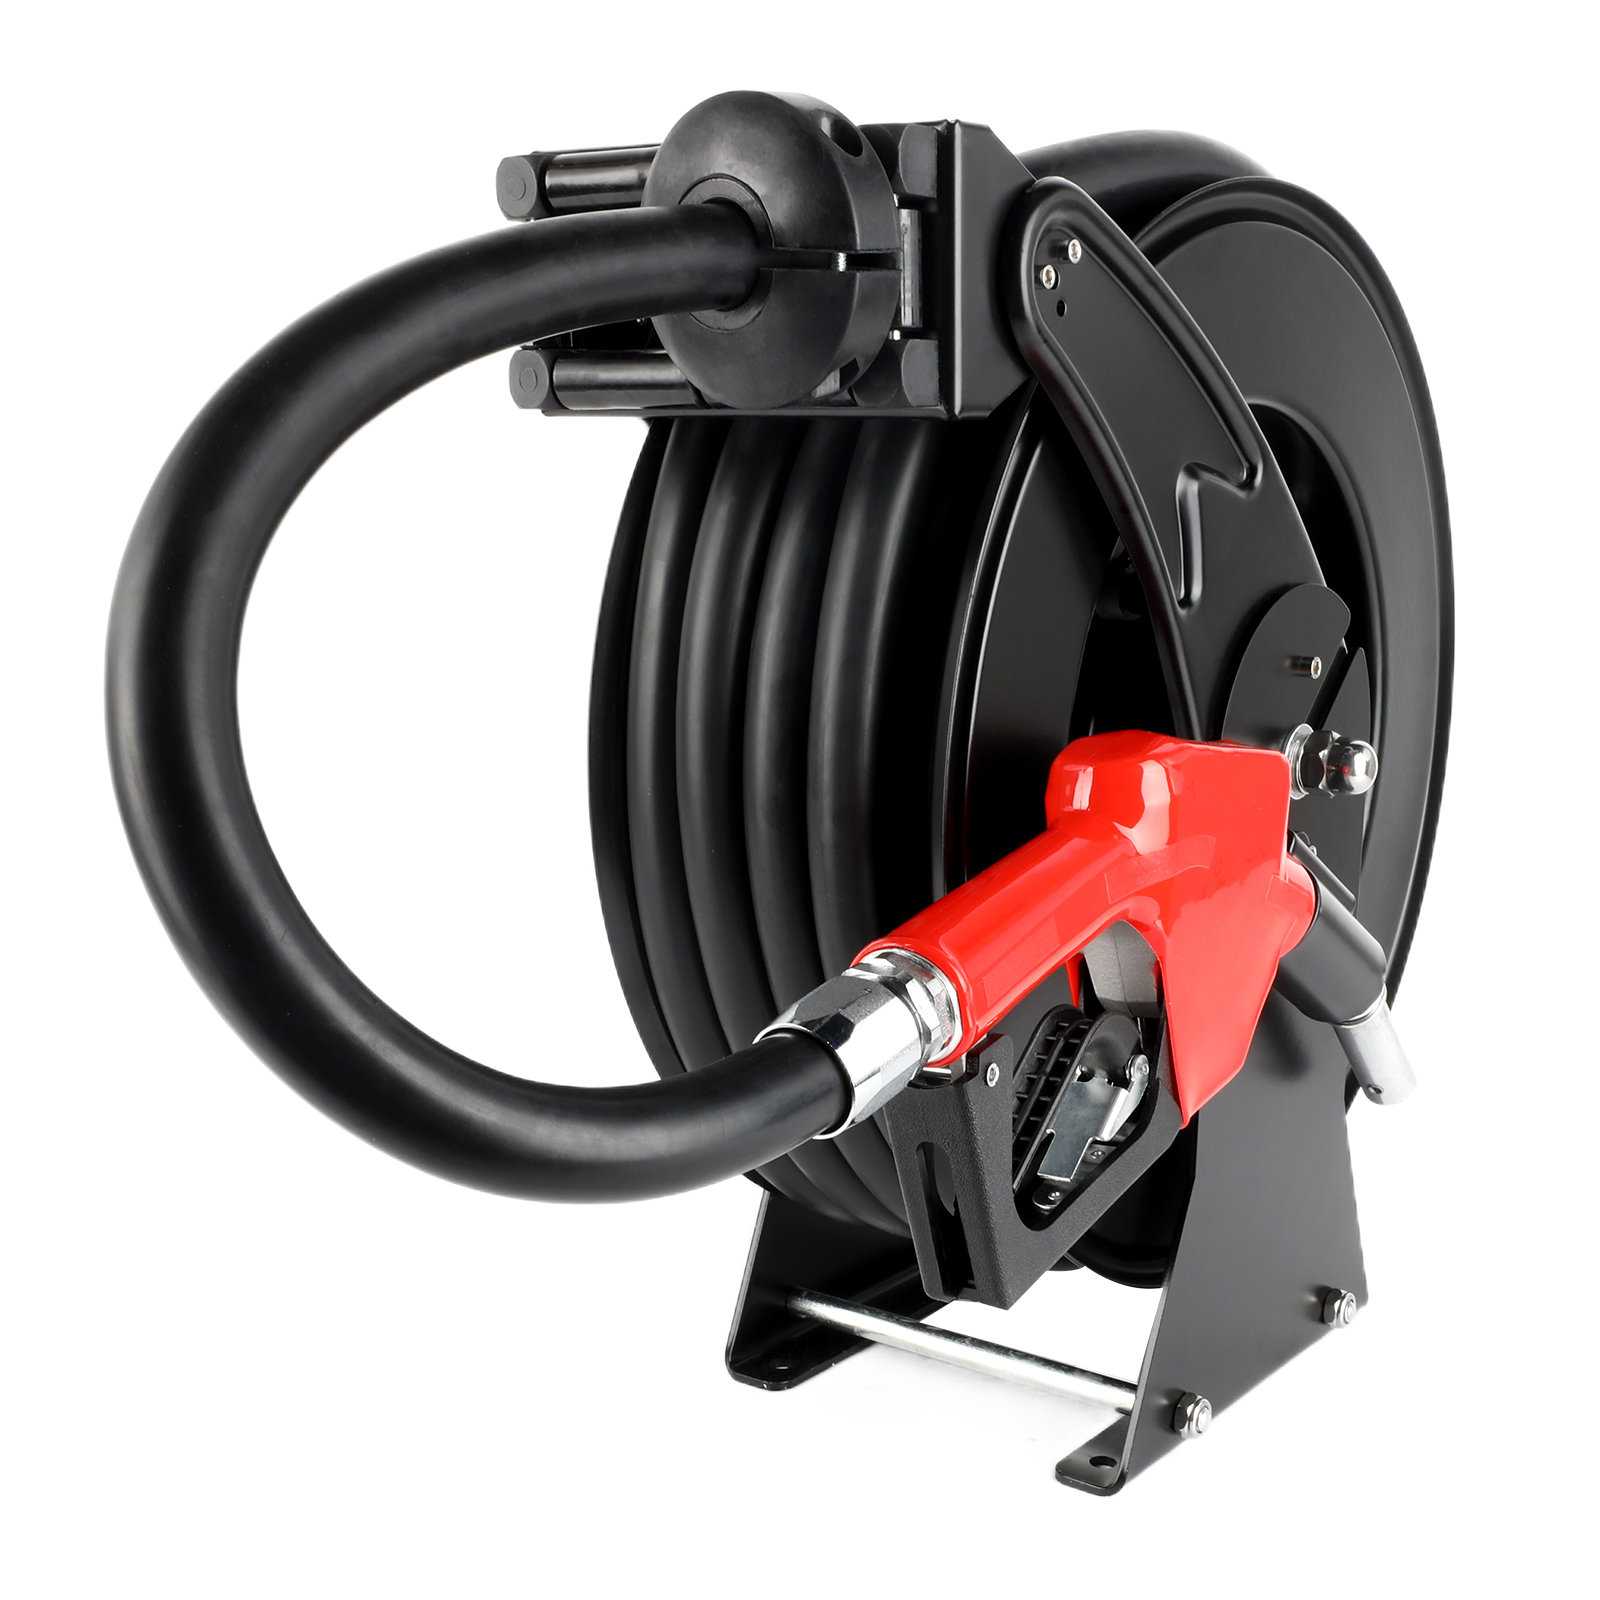 Domccy Fuel Hose Reel Retractable with Fueling Nozzle 3/4 x 50' Spring Driven Diesel Hose Reel 300 PSI Finish: Black